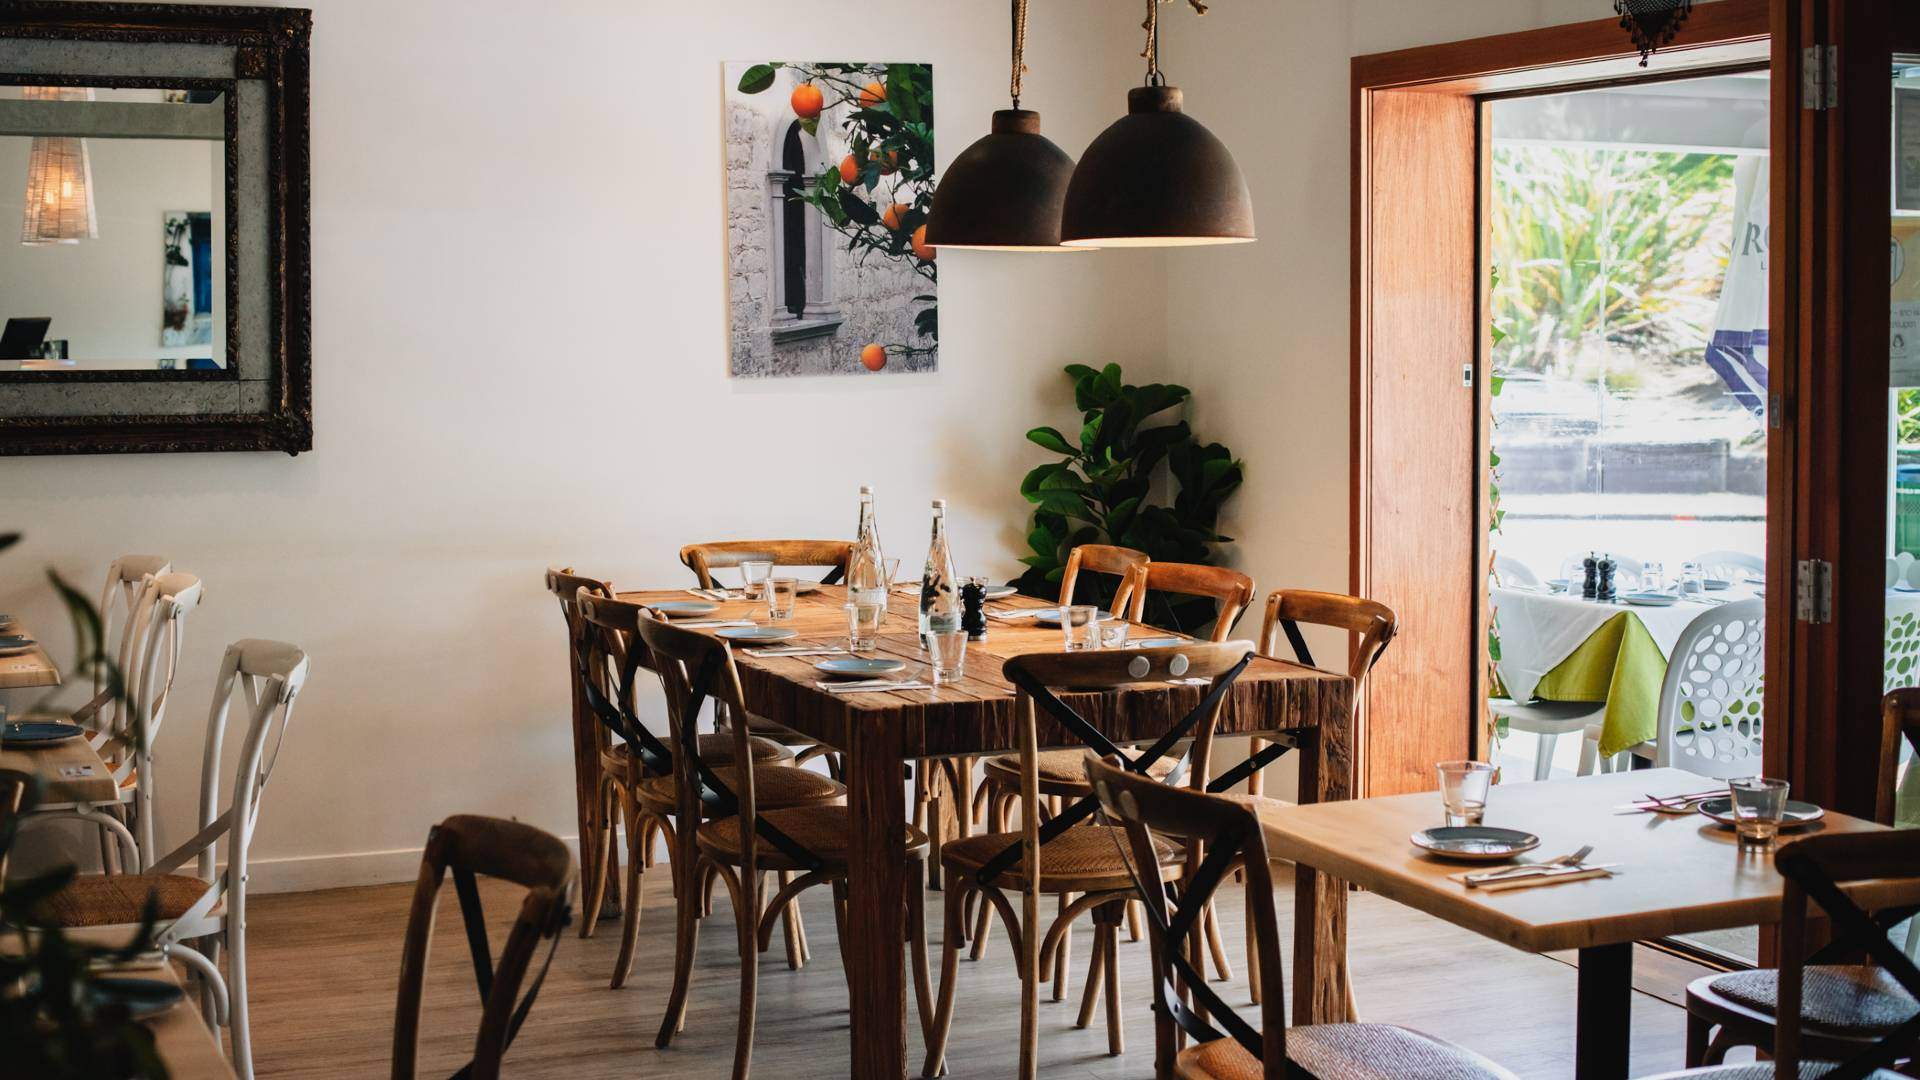 North Shore Eatery El Greco Has Been Crowned Auckland's Best BYO Spot by a Panel of Food Experts